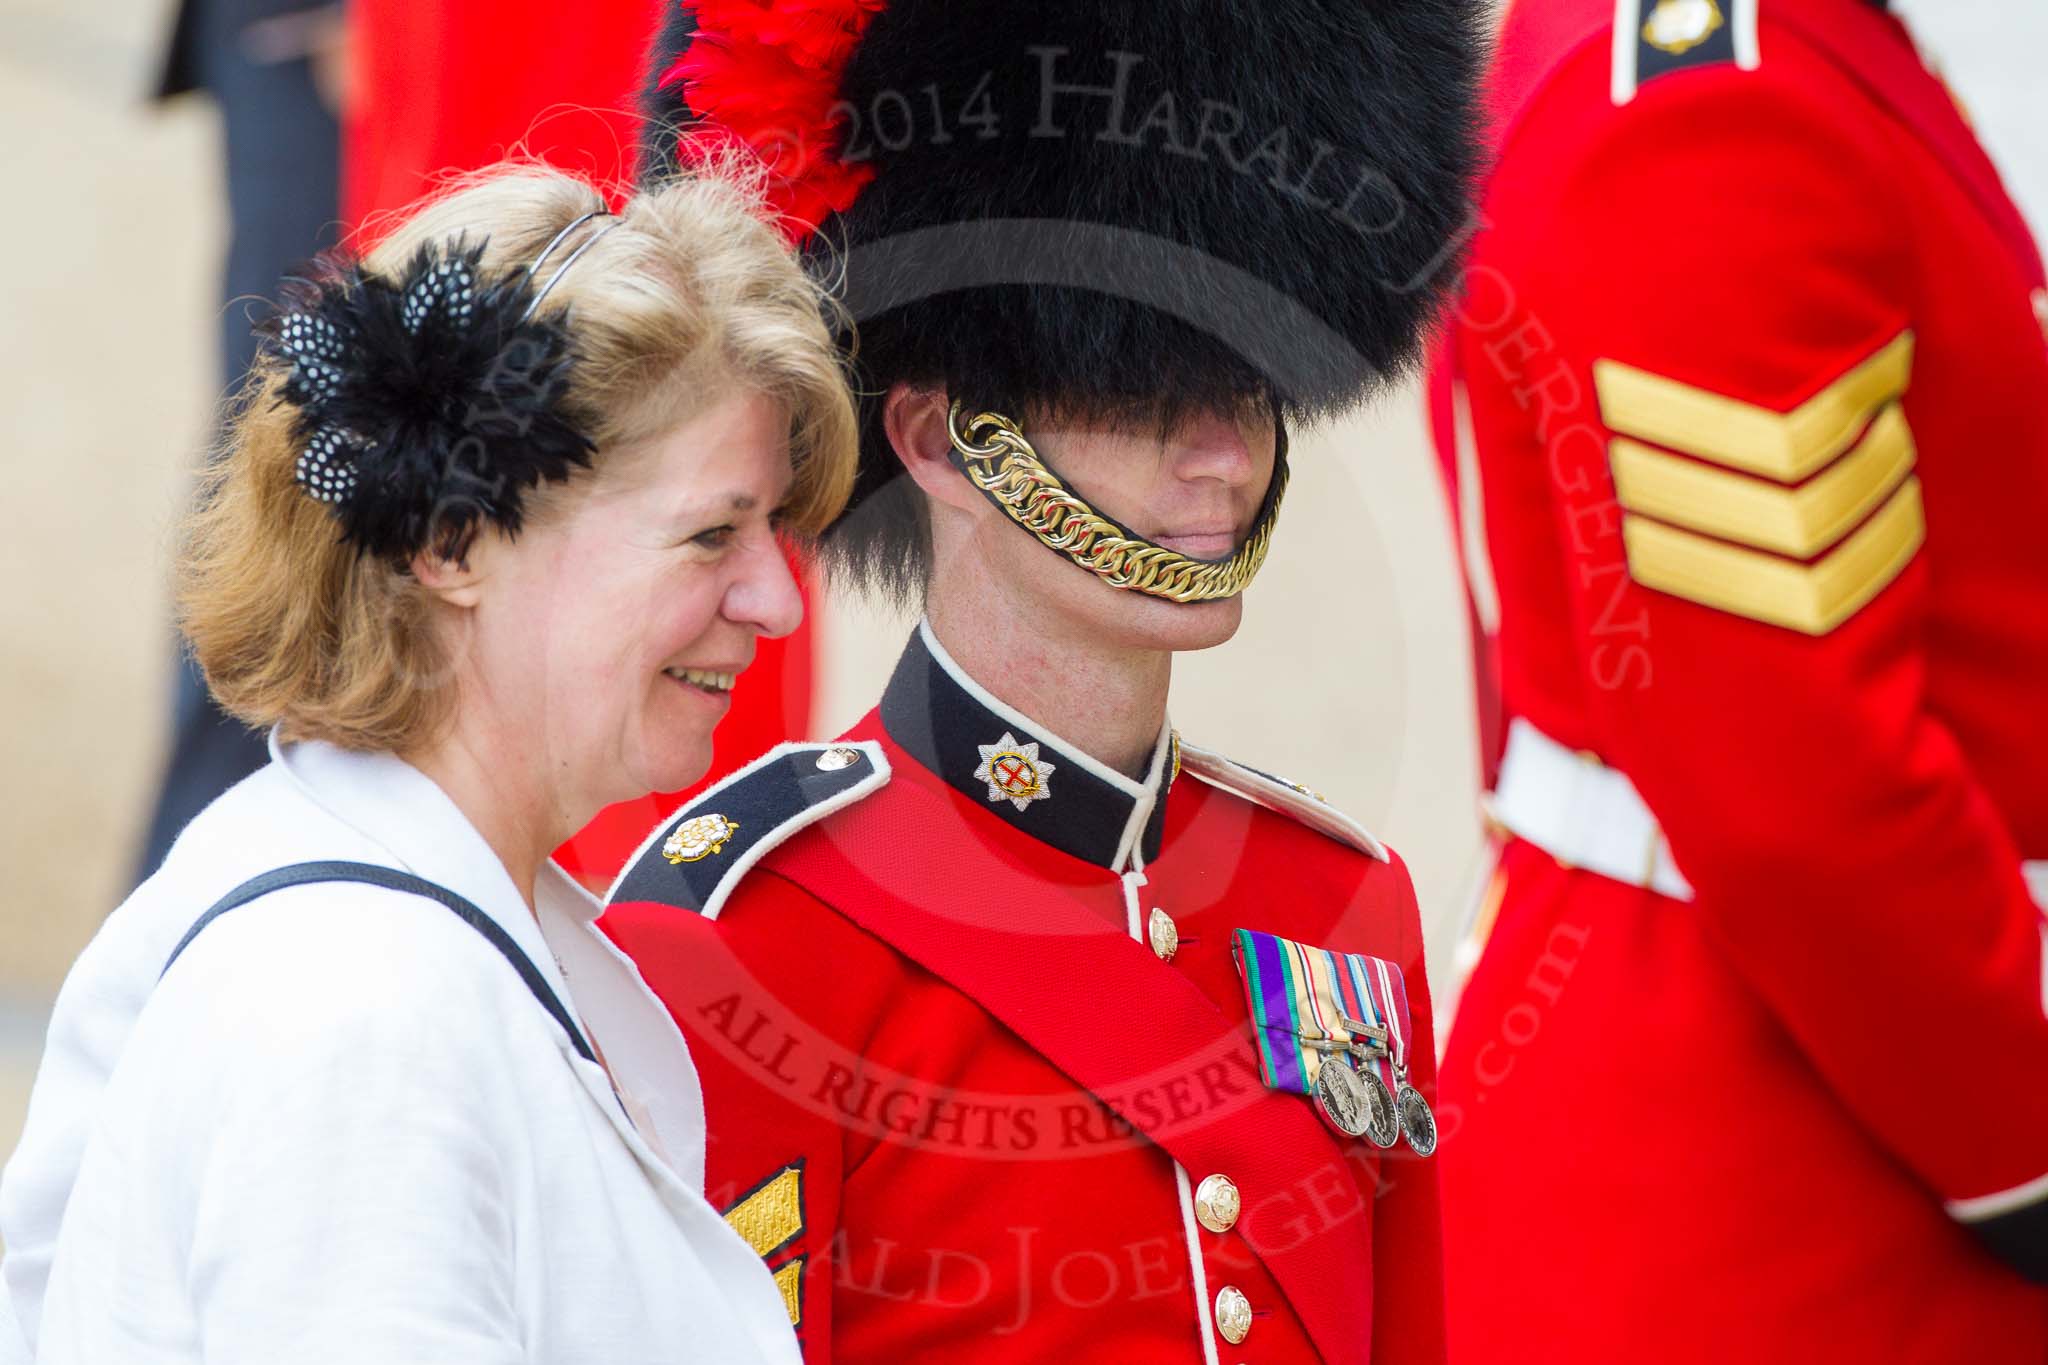 Trooping the Colour 2014.
Horse Guards Parade, Westminster,
London SW1A,

United Kingdom,
on 14 June 2014 at 09:47, image #53